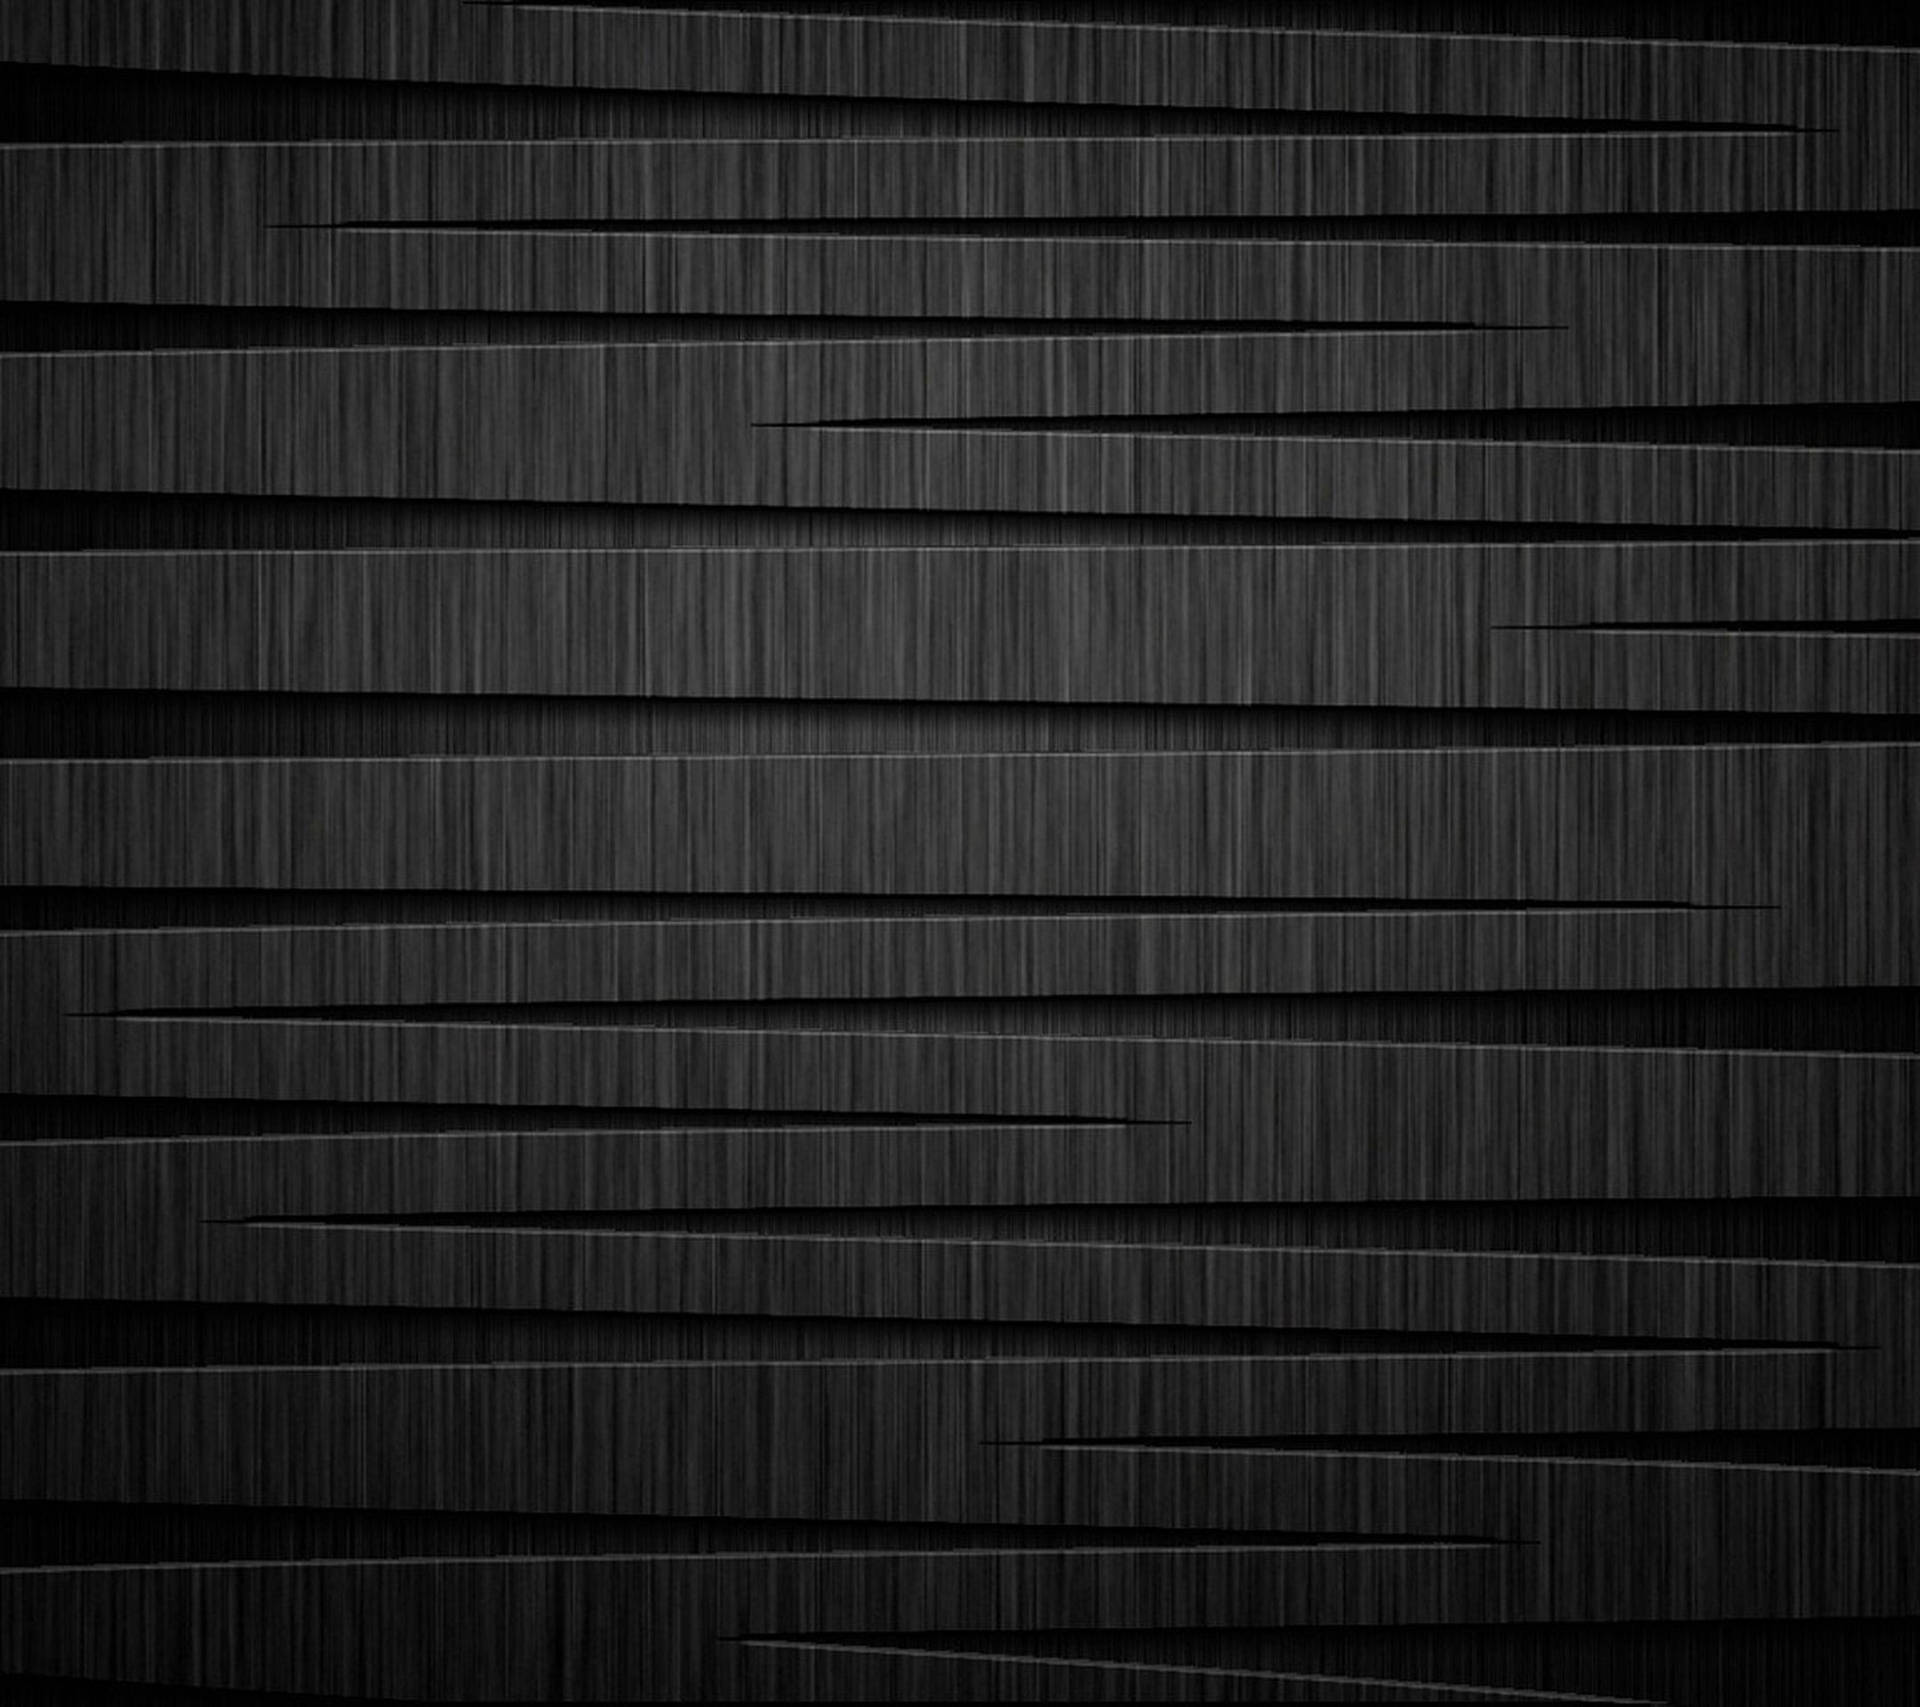 Abstract Wood Texture Black Pattern Background